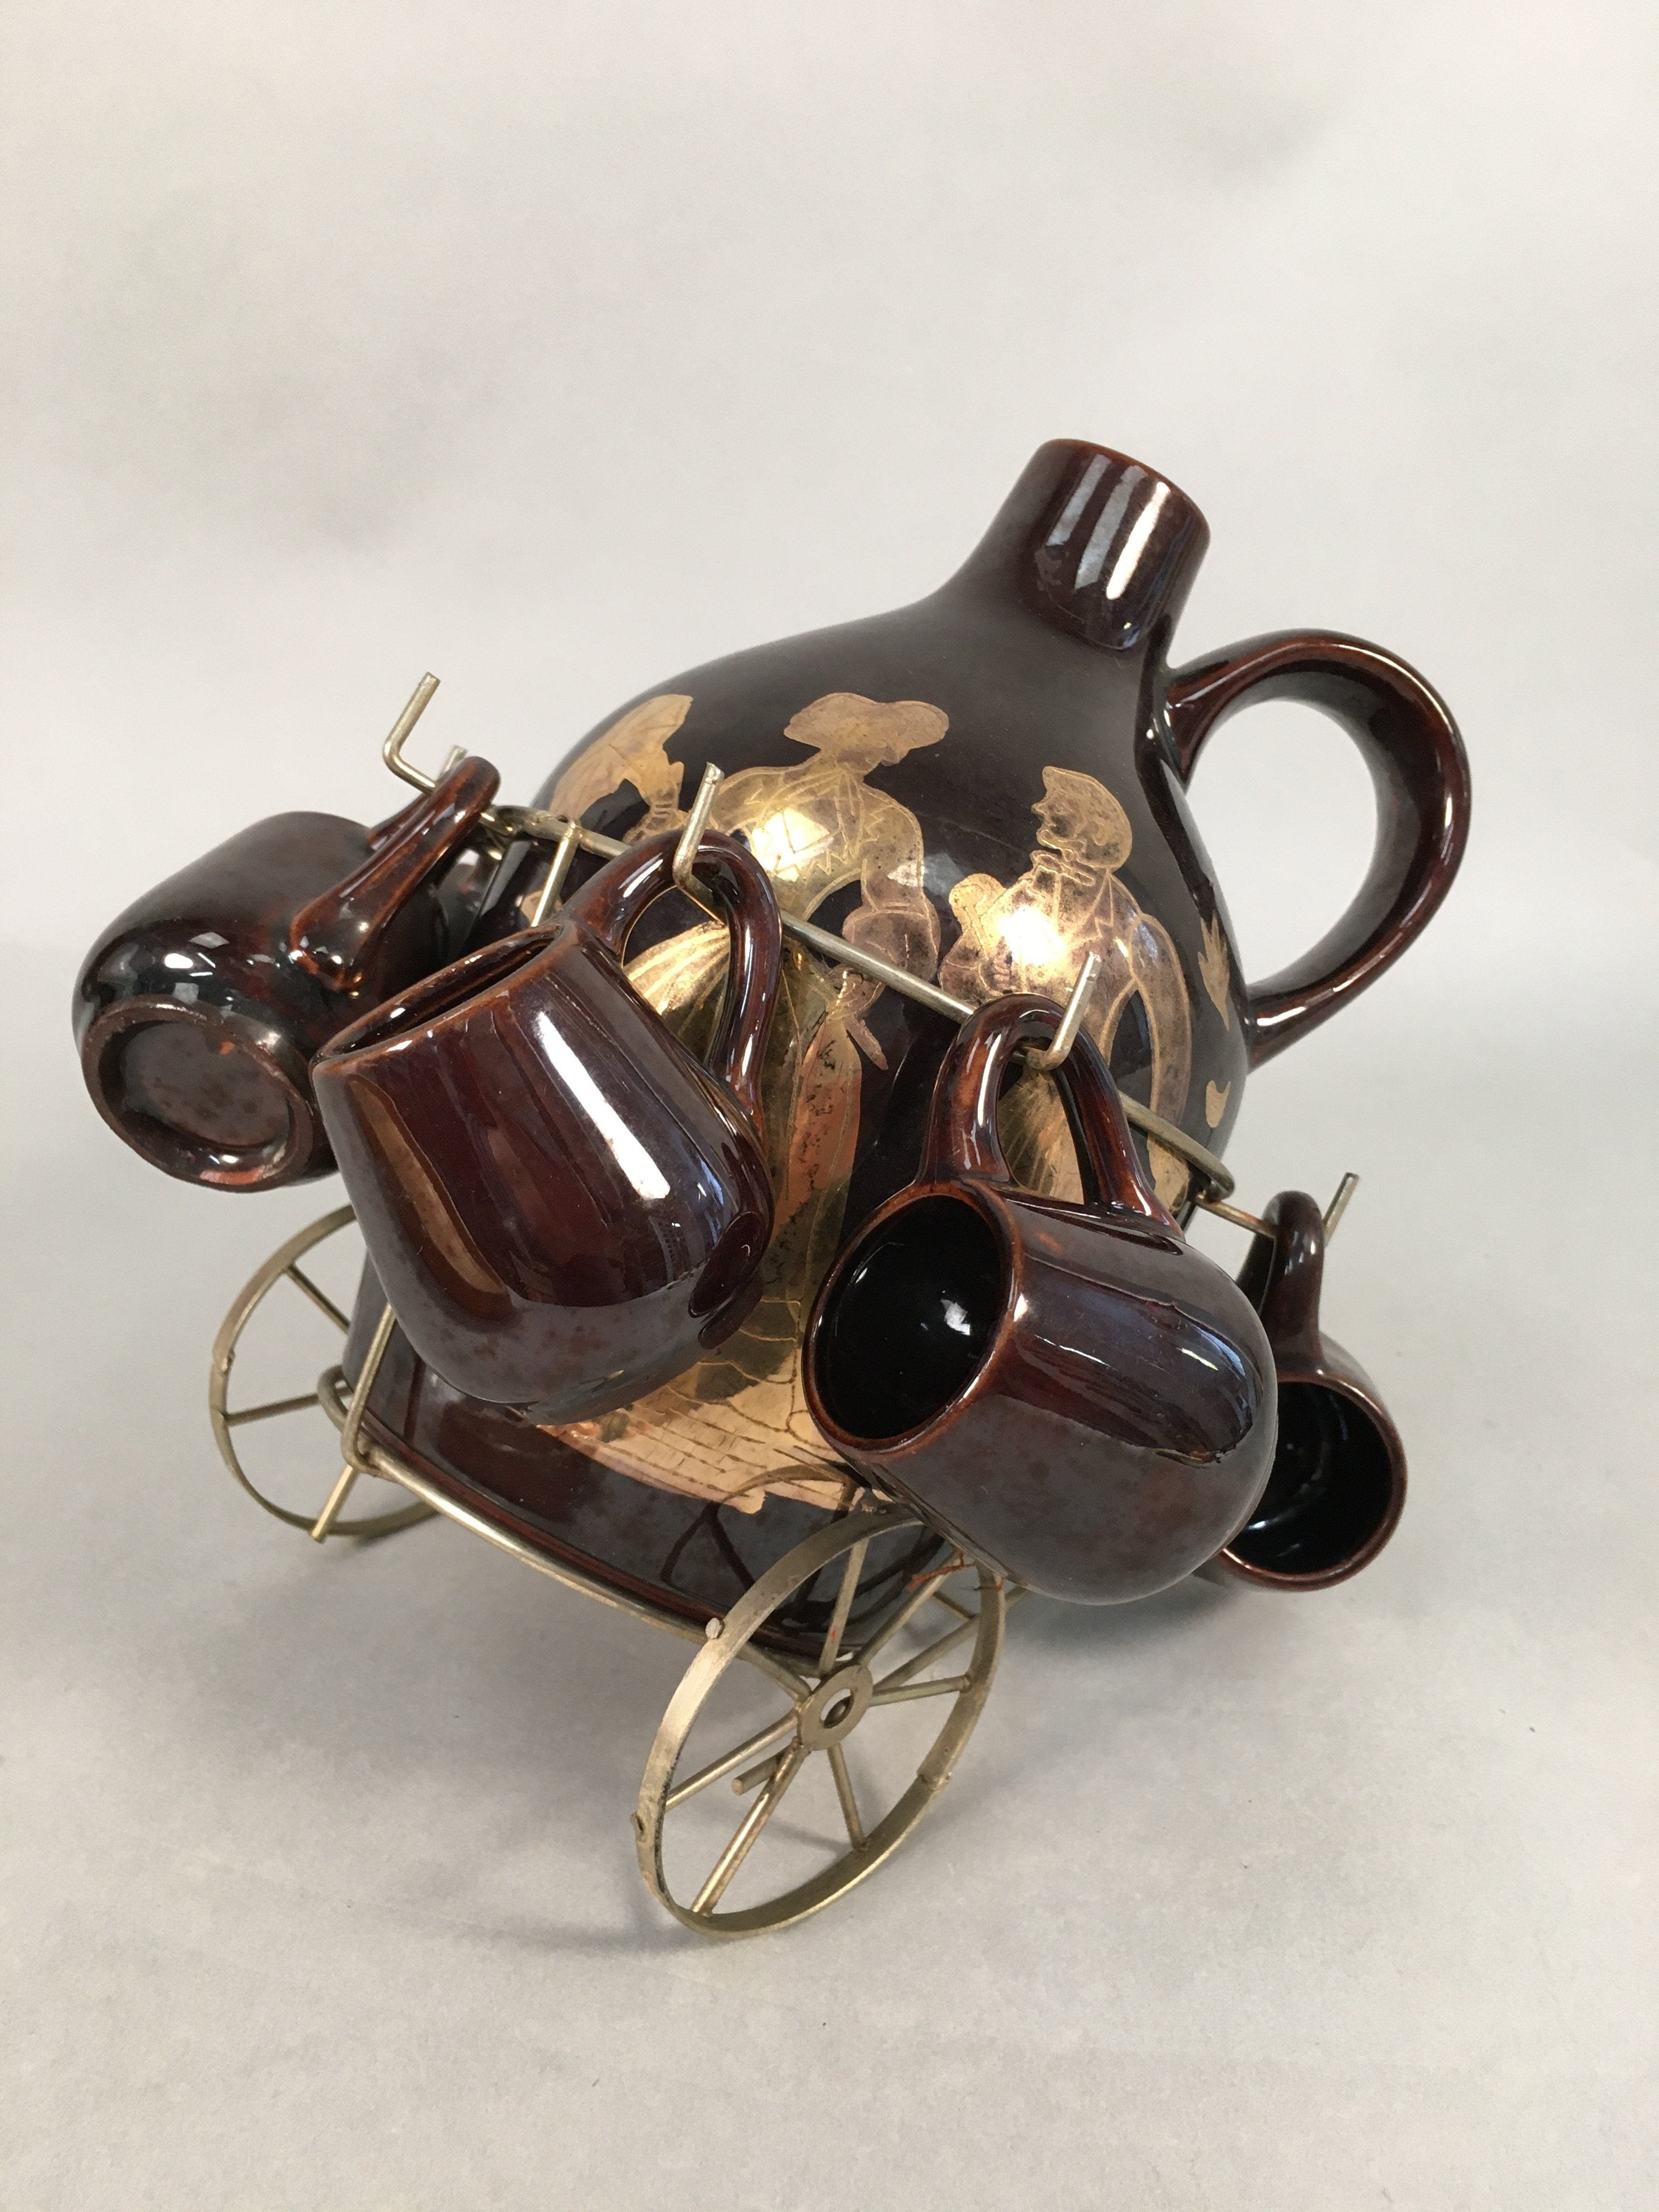 Decorative Brandy Server Cup Set Horse Carriage Stand Brown Gold Pilgrim PX536